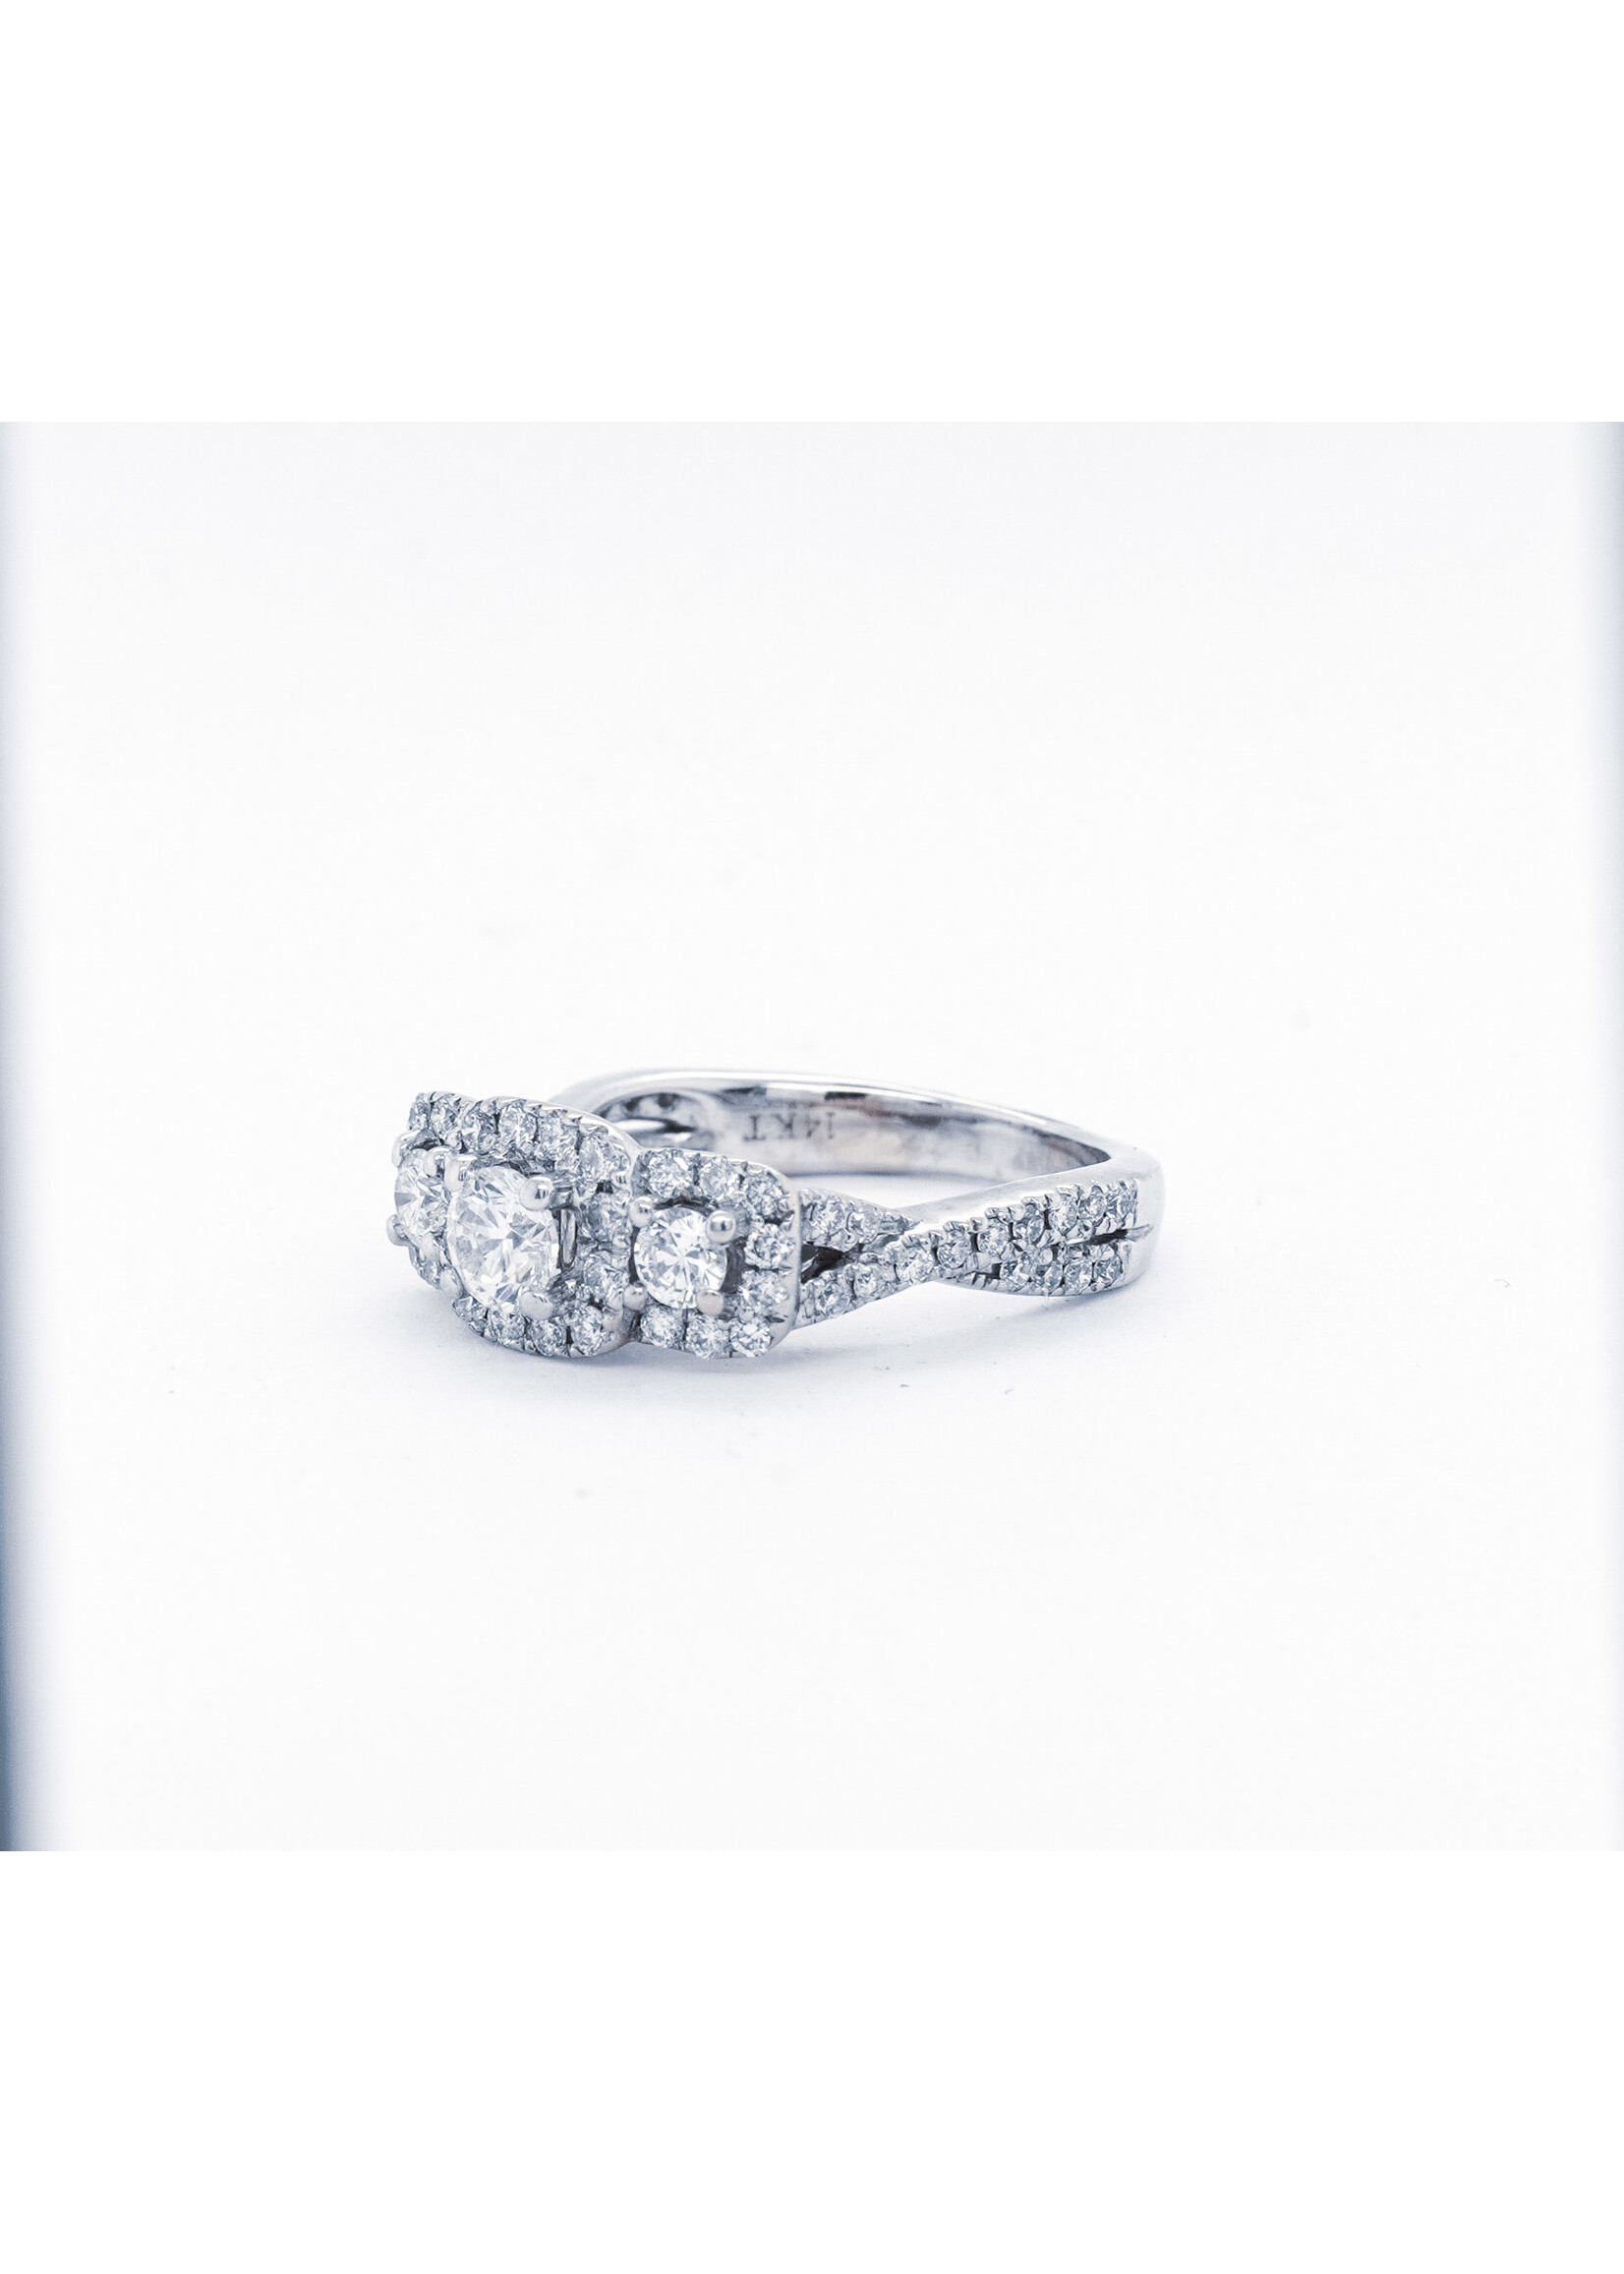 14KW 4.3g 1.00tw (.30ctr) H/SI2  Vera Wang Diamond Halo Engagement Ring (size 4.75)